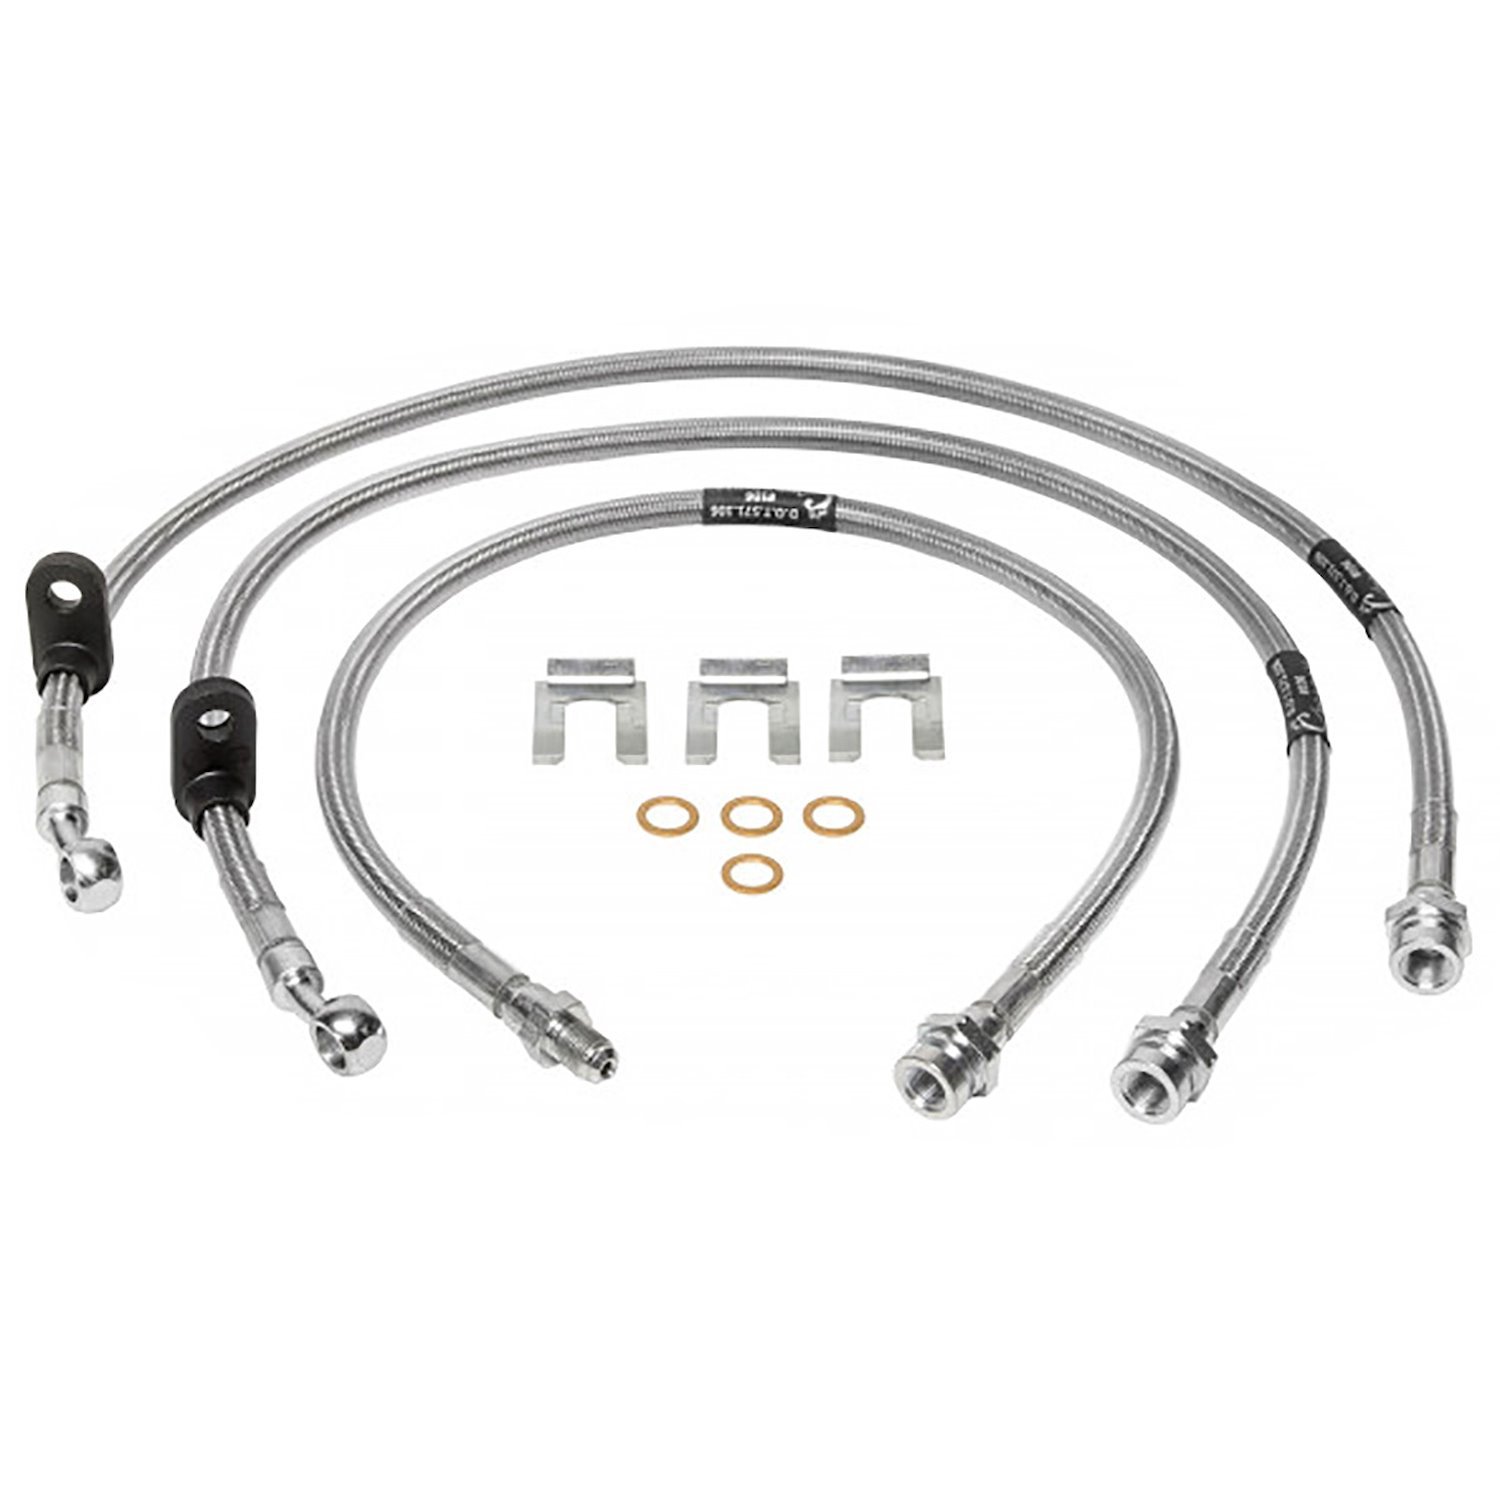 Extended Brake Line Kit for 1995.5-2004 Toyota Tacoma w/ 6 in. Lift